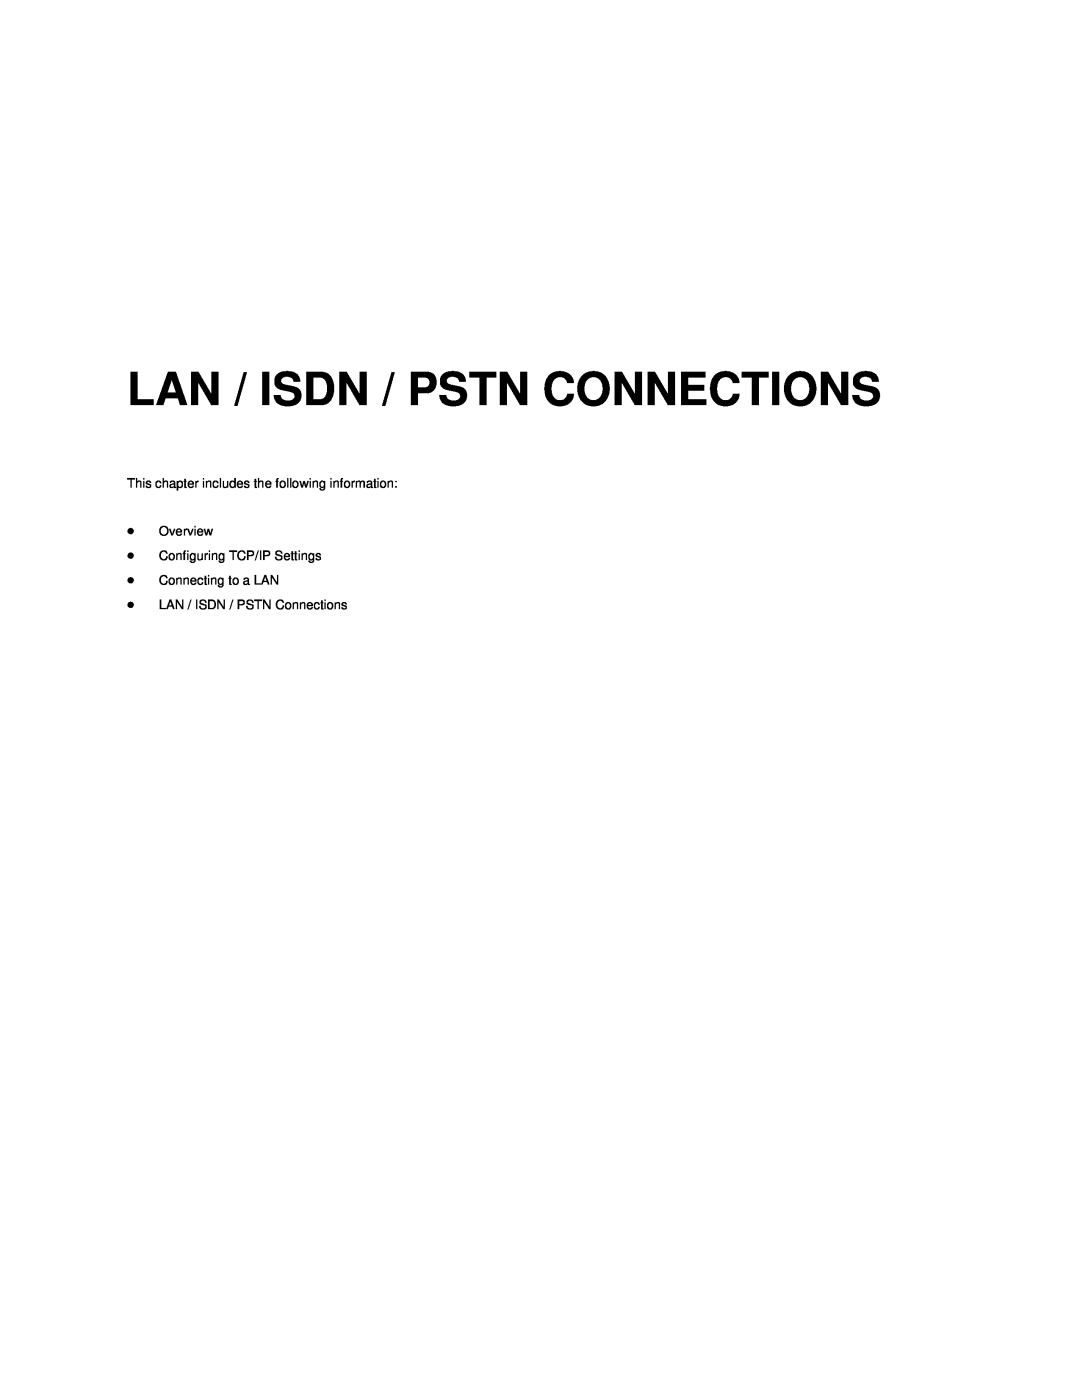 Toshiba NVS8-X, NVS32-X, NVS16-X Lan / Isdn / Pstn Connections, This chapter includes the following information Overview 